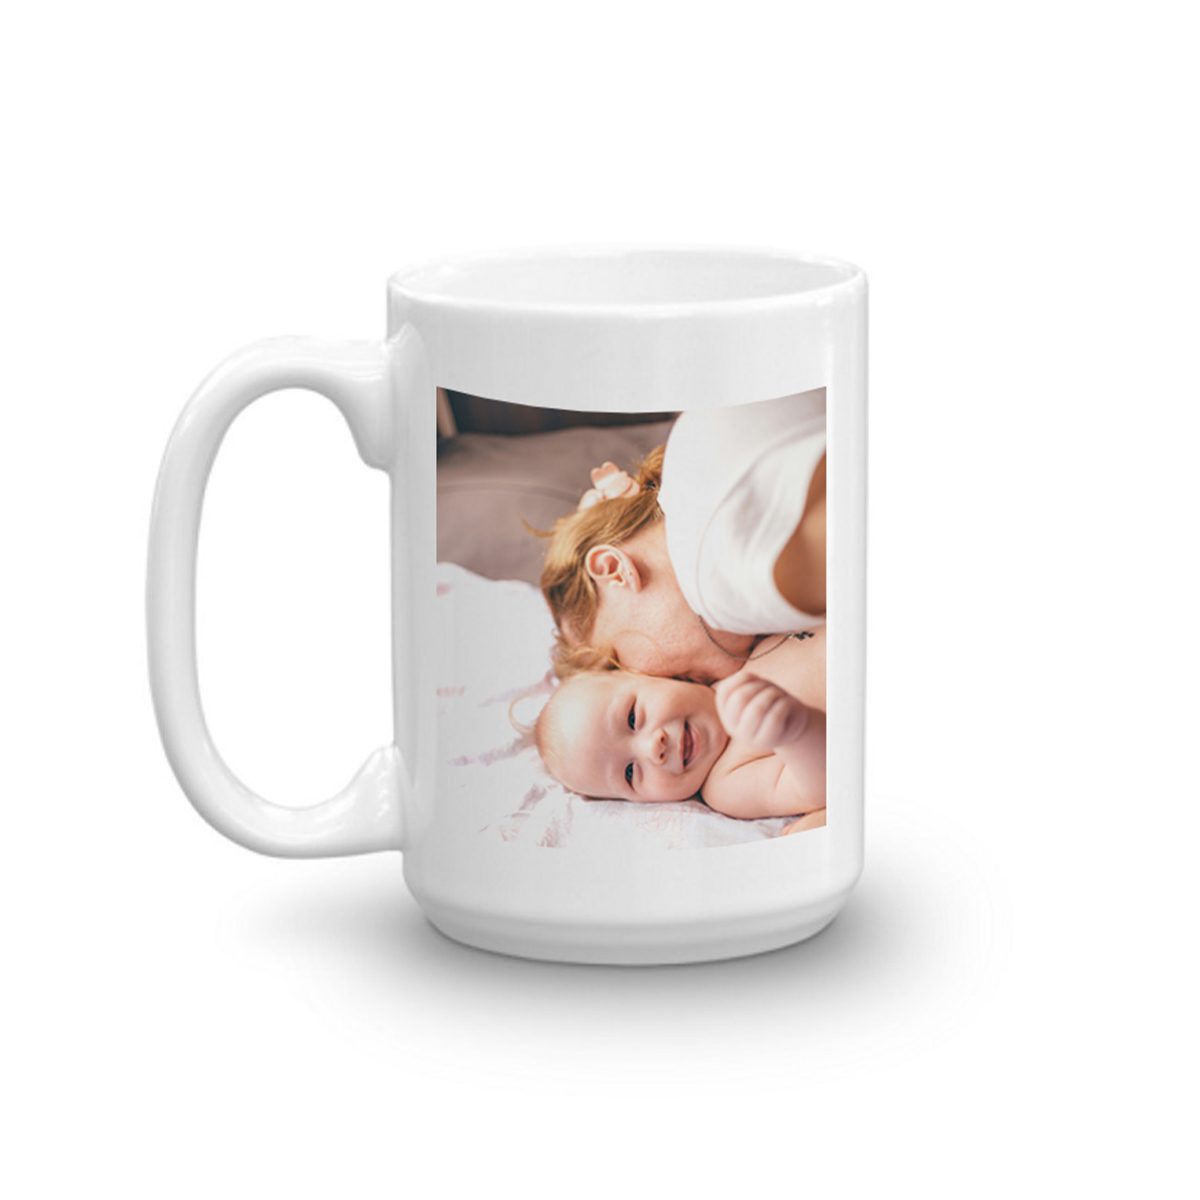 Custom photo mug makes a sweet and sentimental mother's day gift.